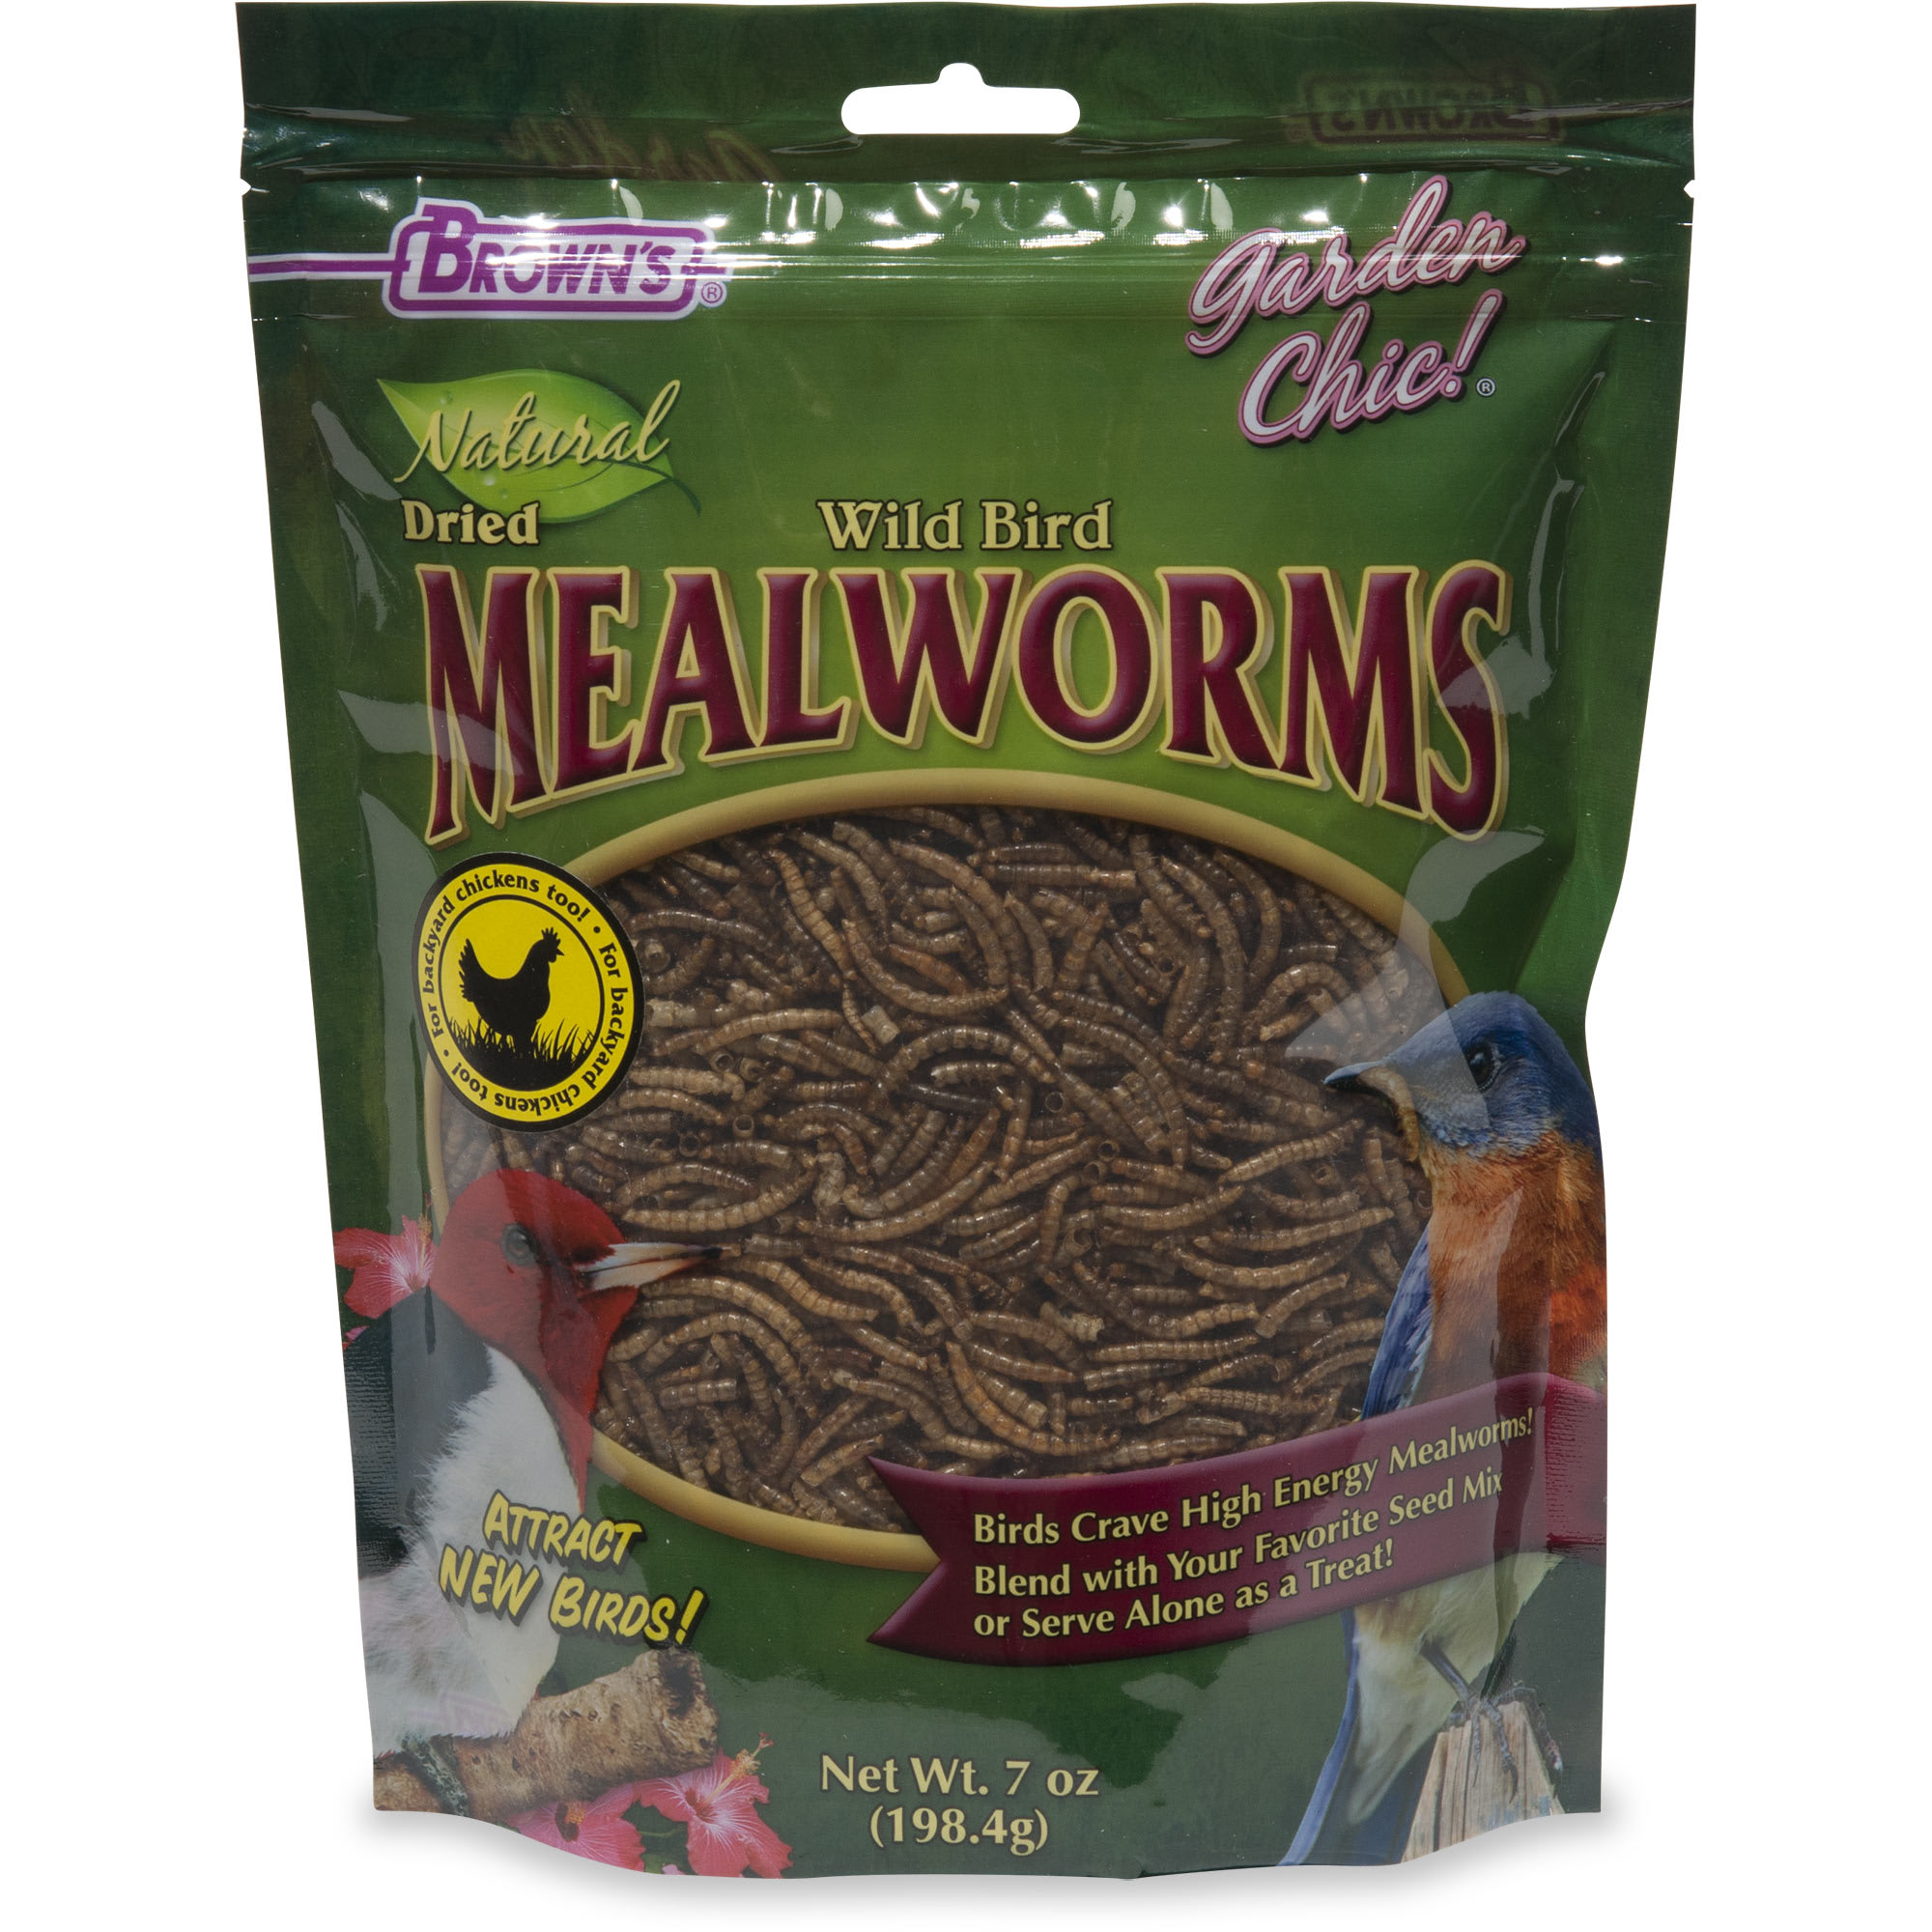 Delicious Meal Worms for Chickens Fish 100 Percent Natural Dried Mealworms Wild Birds Reptiles Bulk Mealworms FROLIC WINGS 3 lb Natural Worms 